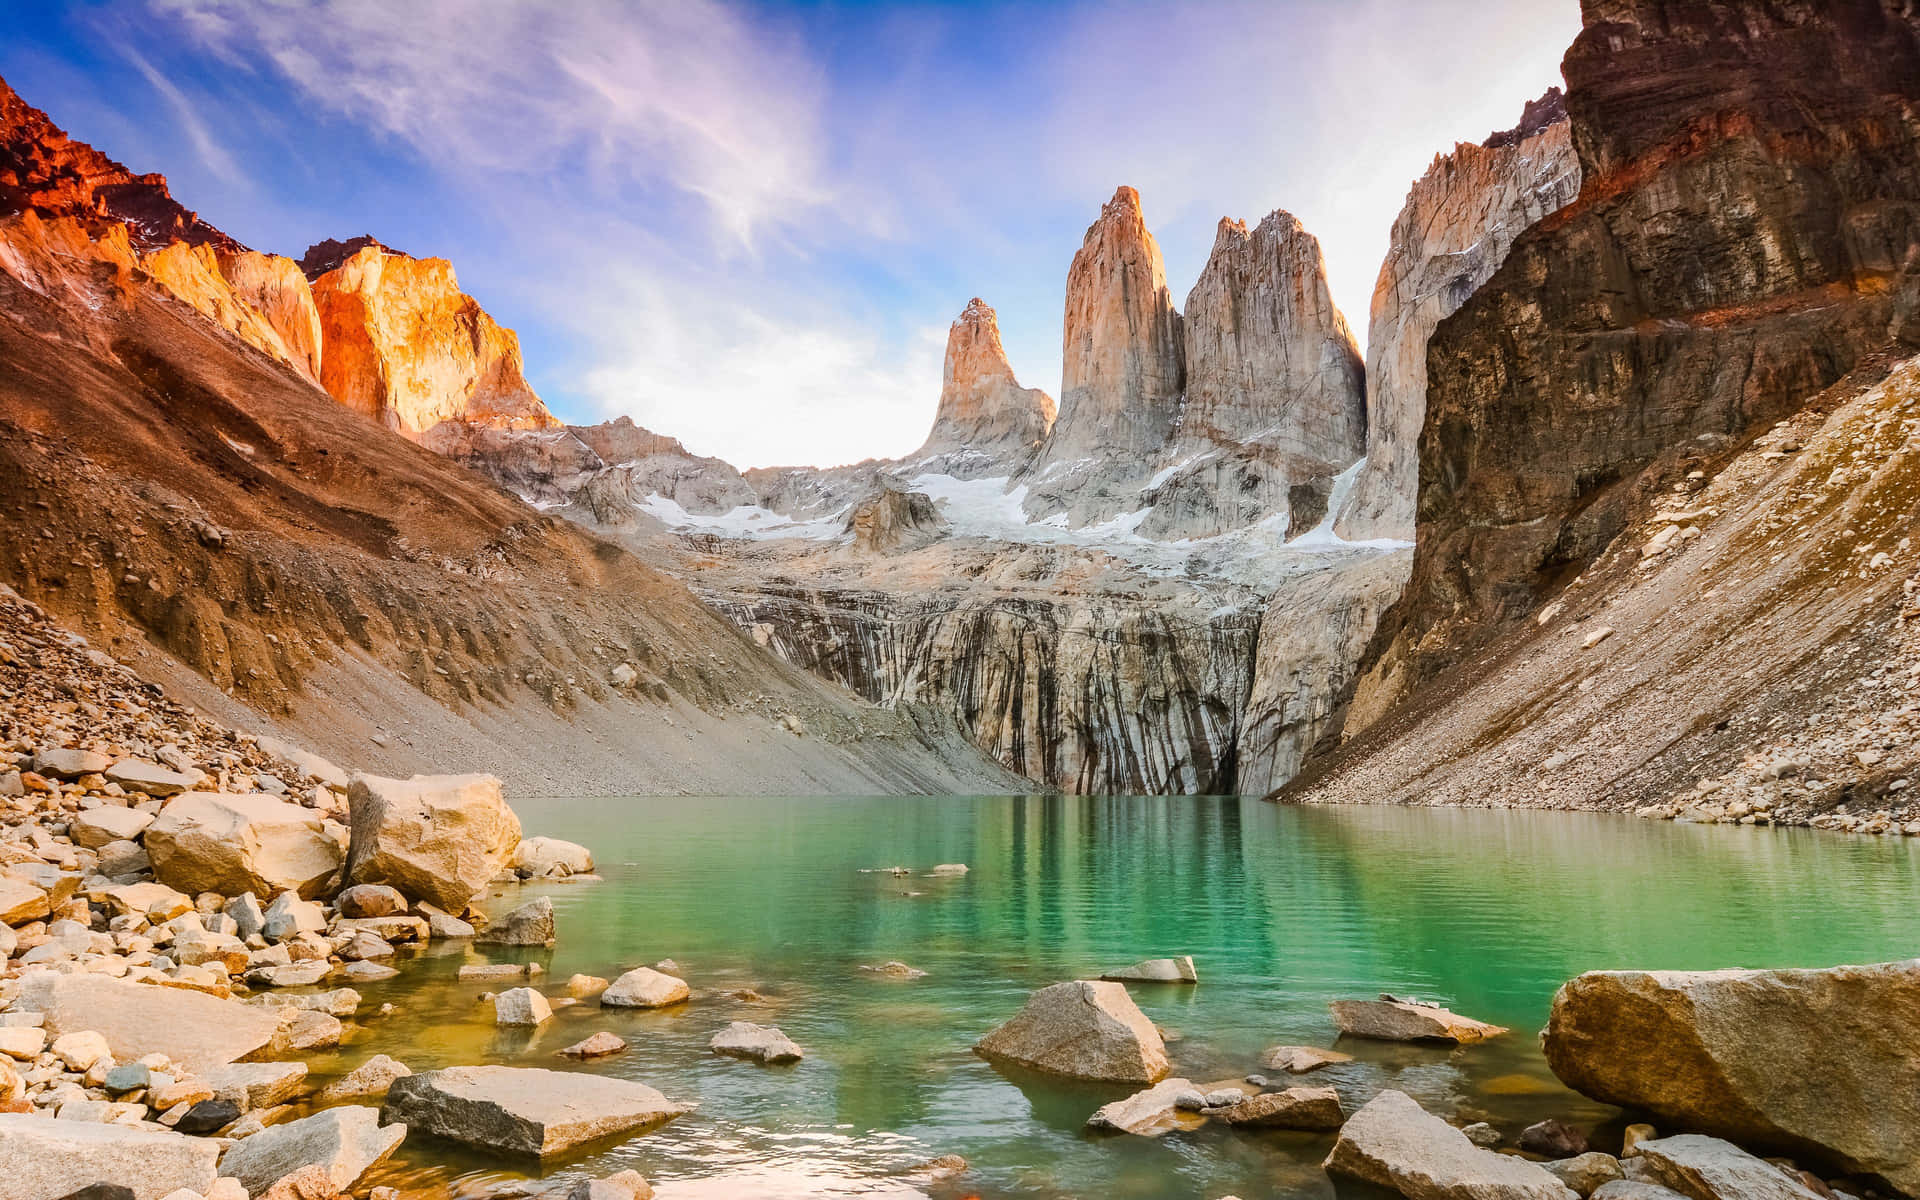 Explore the rugged beauty of Patagonia